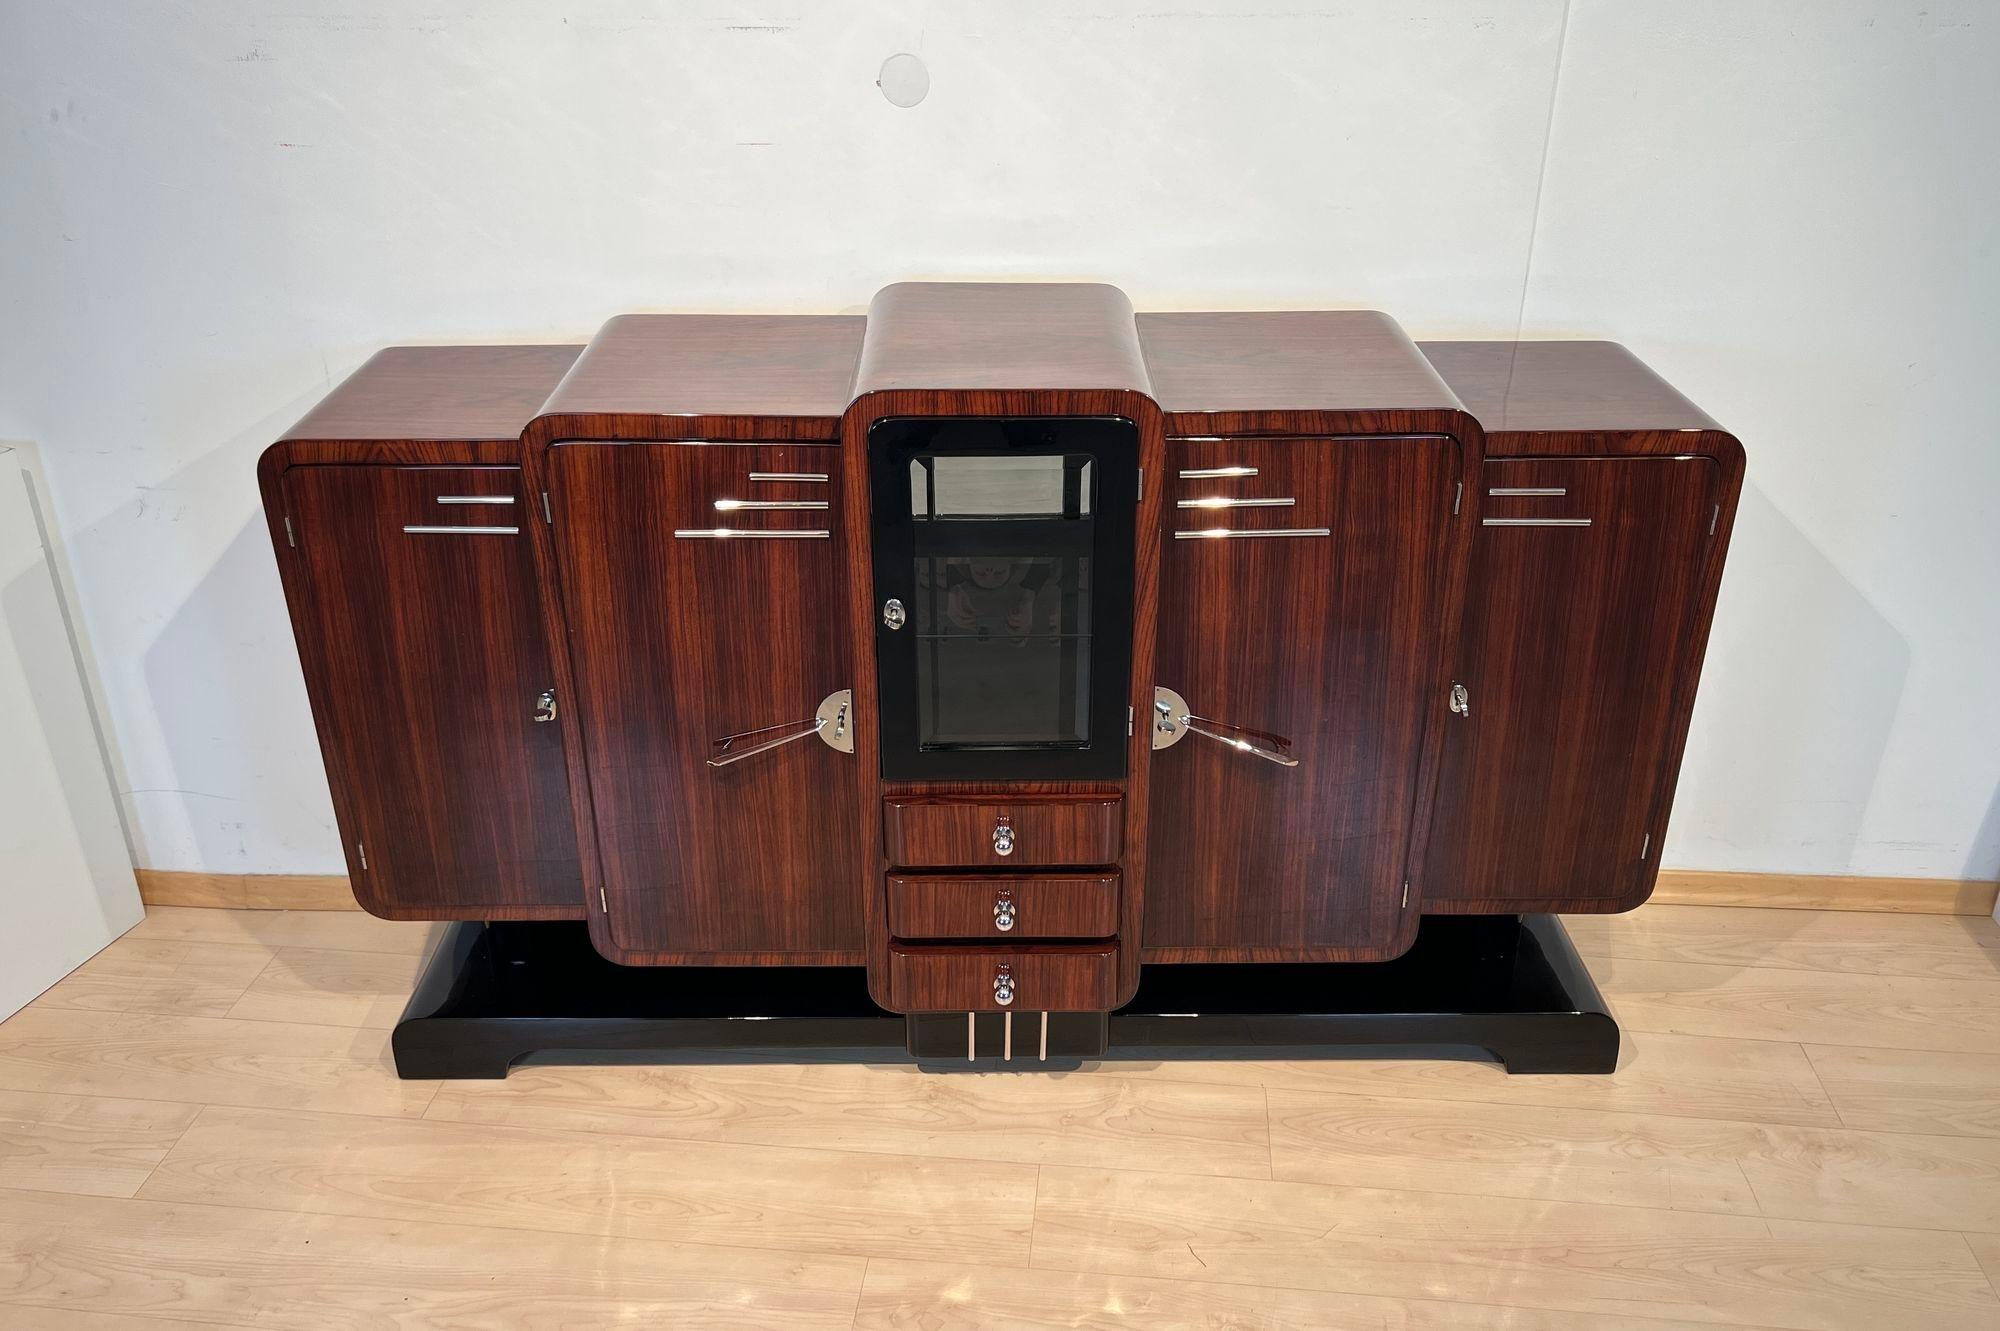 Glass Art Deco Sideboard, Rosewood, Black Lacquer, Chrome, France circa 1925